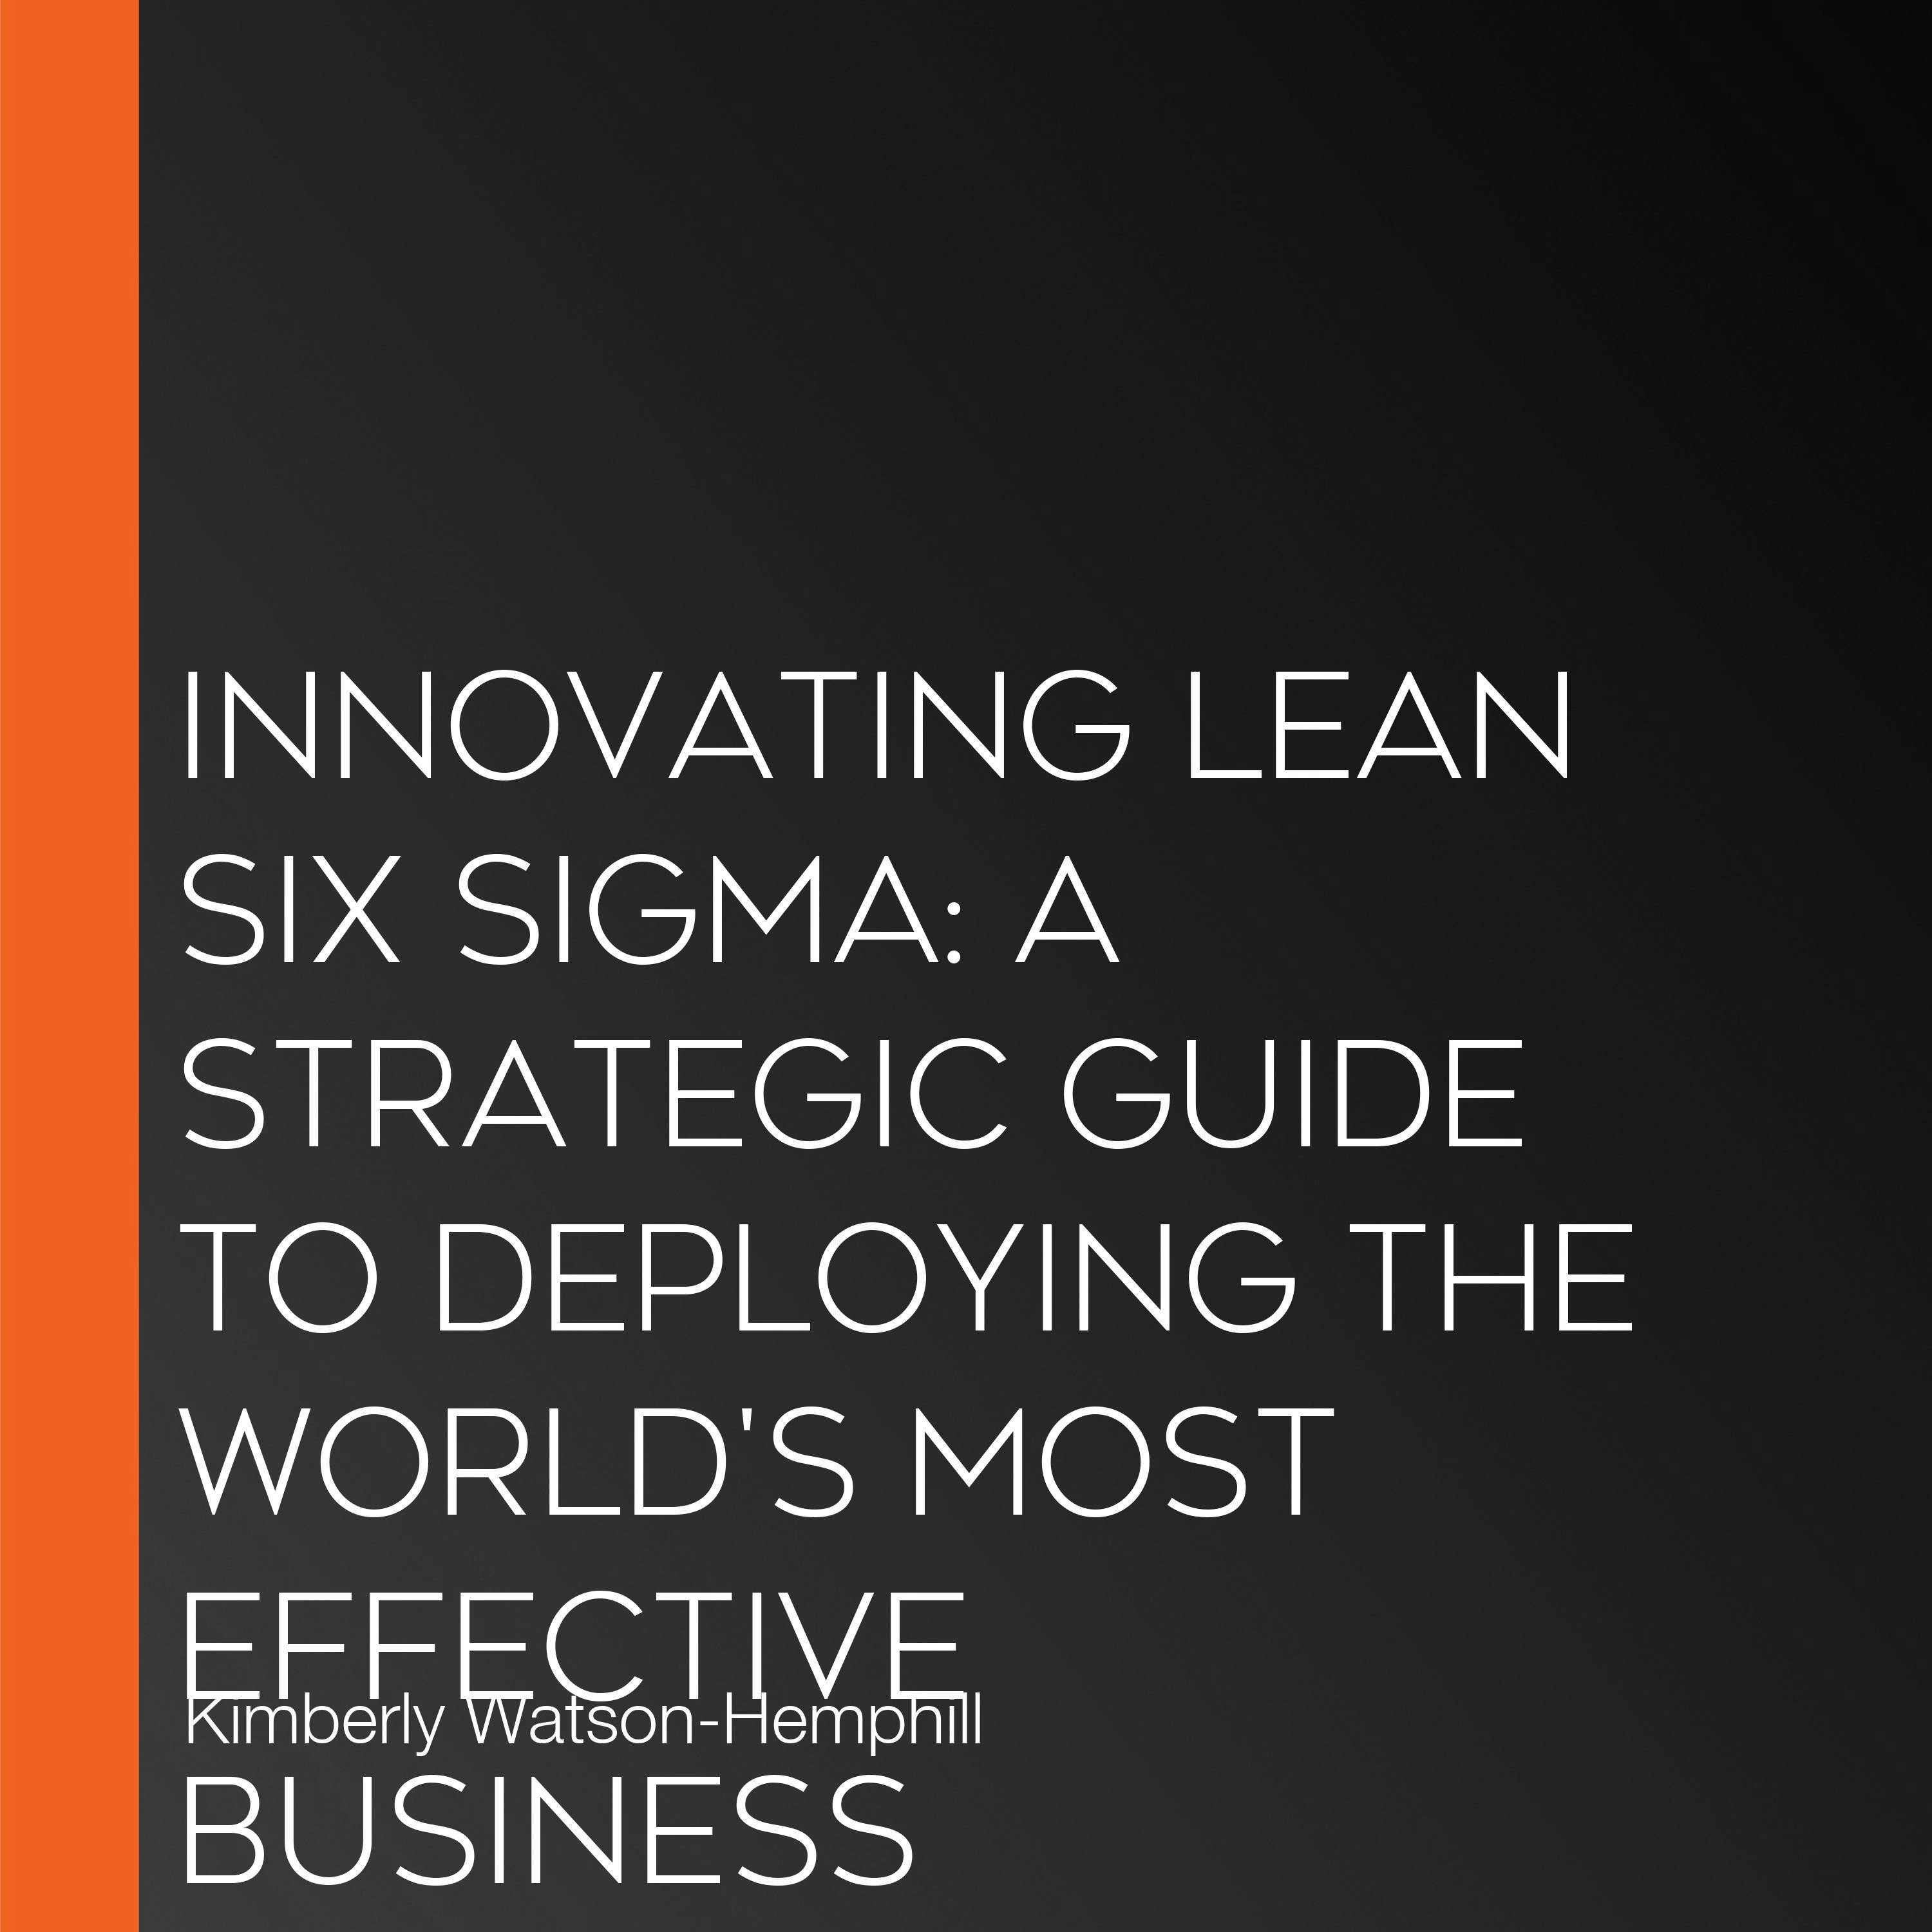 Innovating Lean Six Sigma: A Strategic Guide to Deploying the World's Most Effective Business Improvement Process - undefined